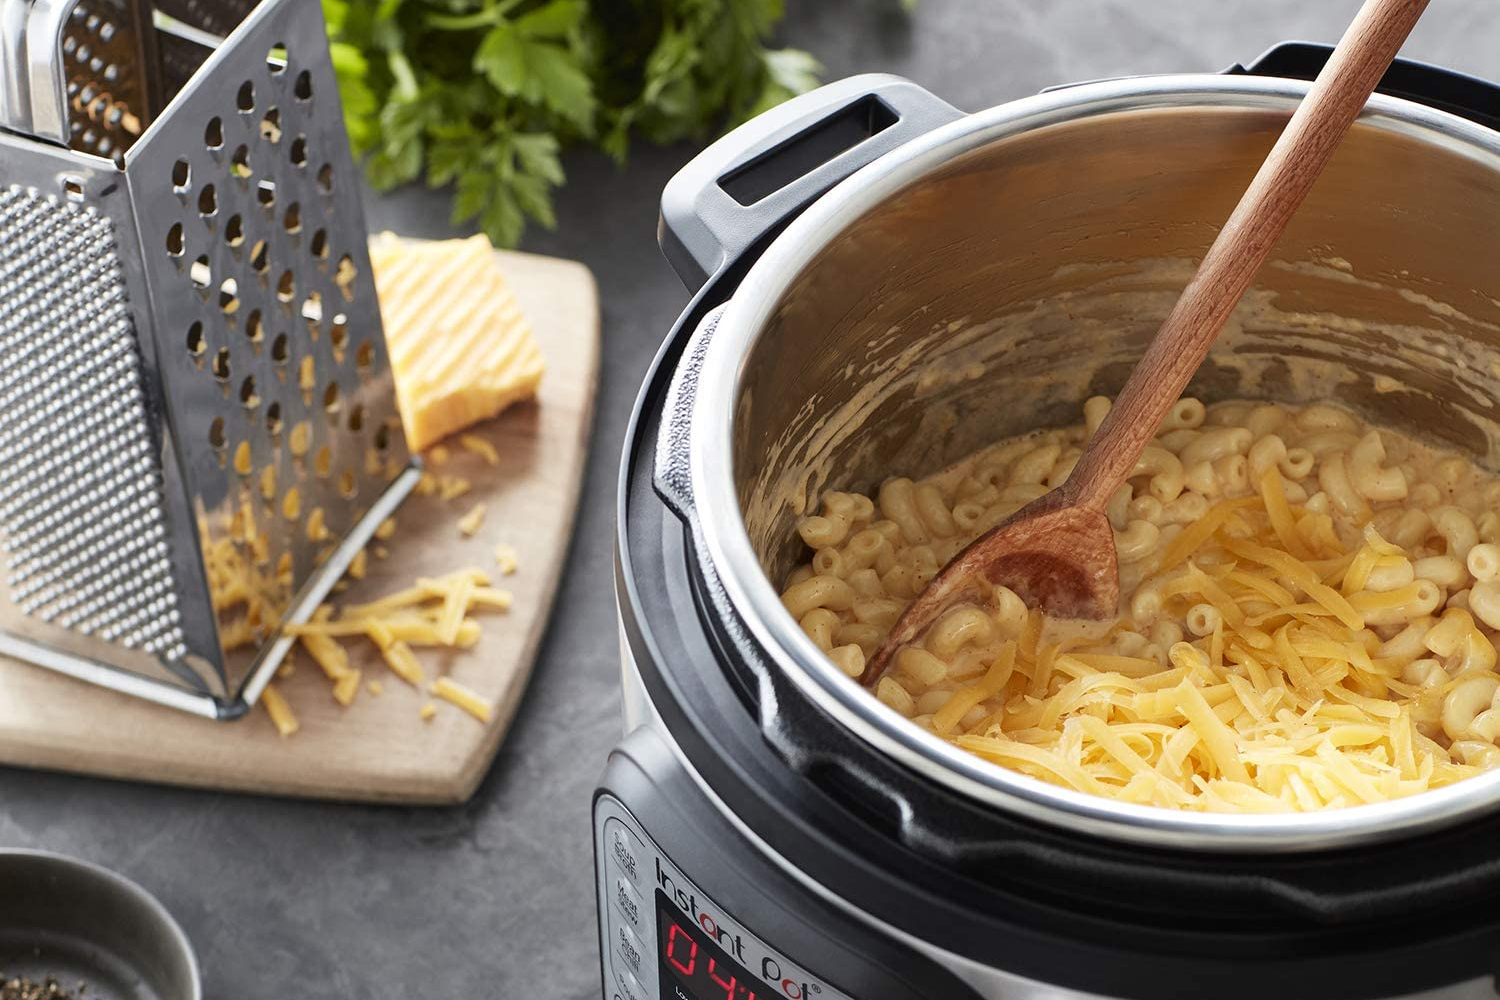 Top 5 Must-Have Instant Pot Accessories